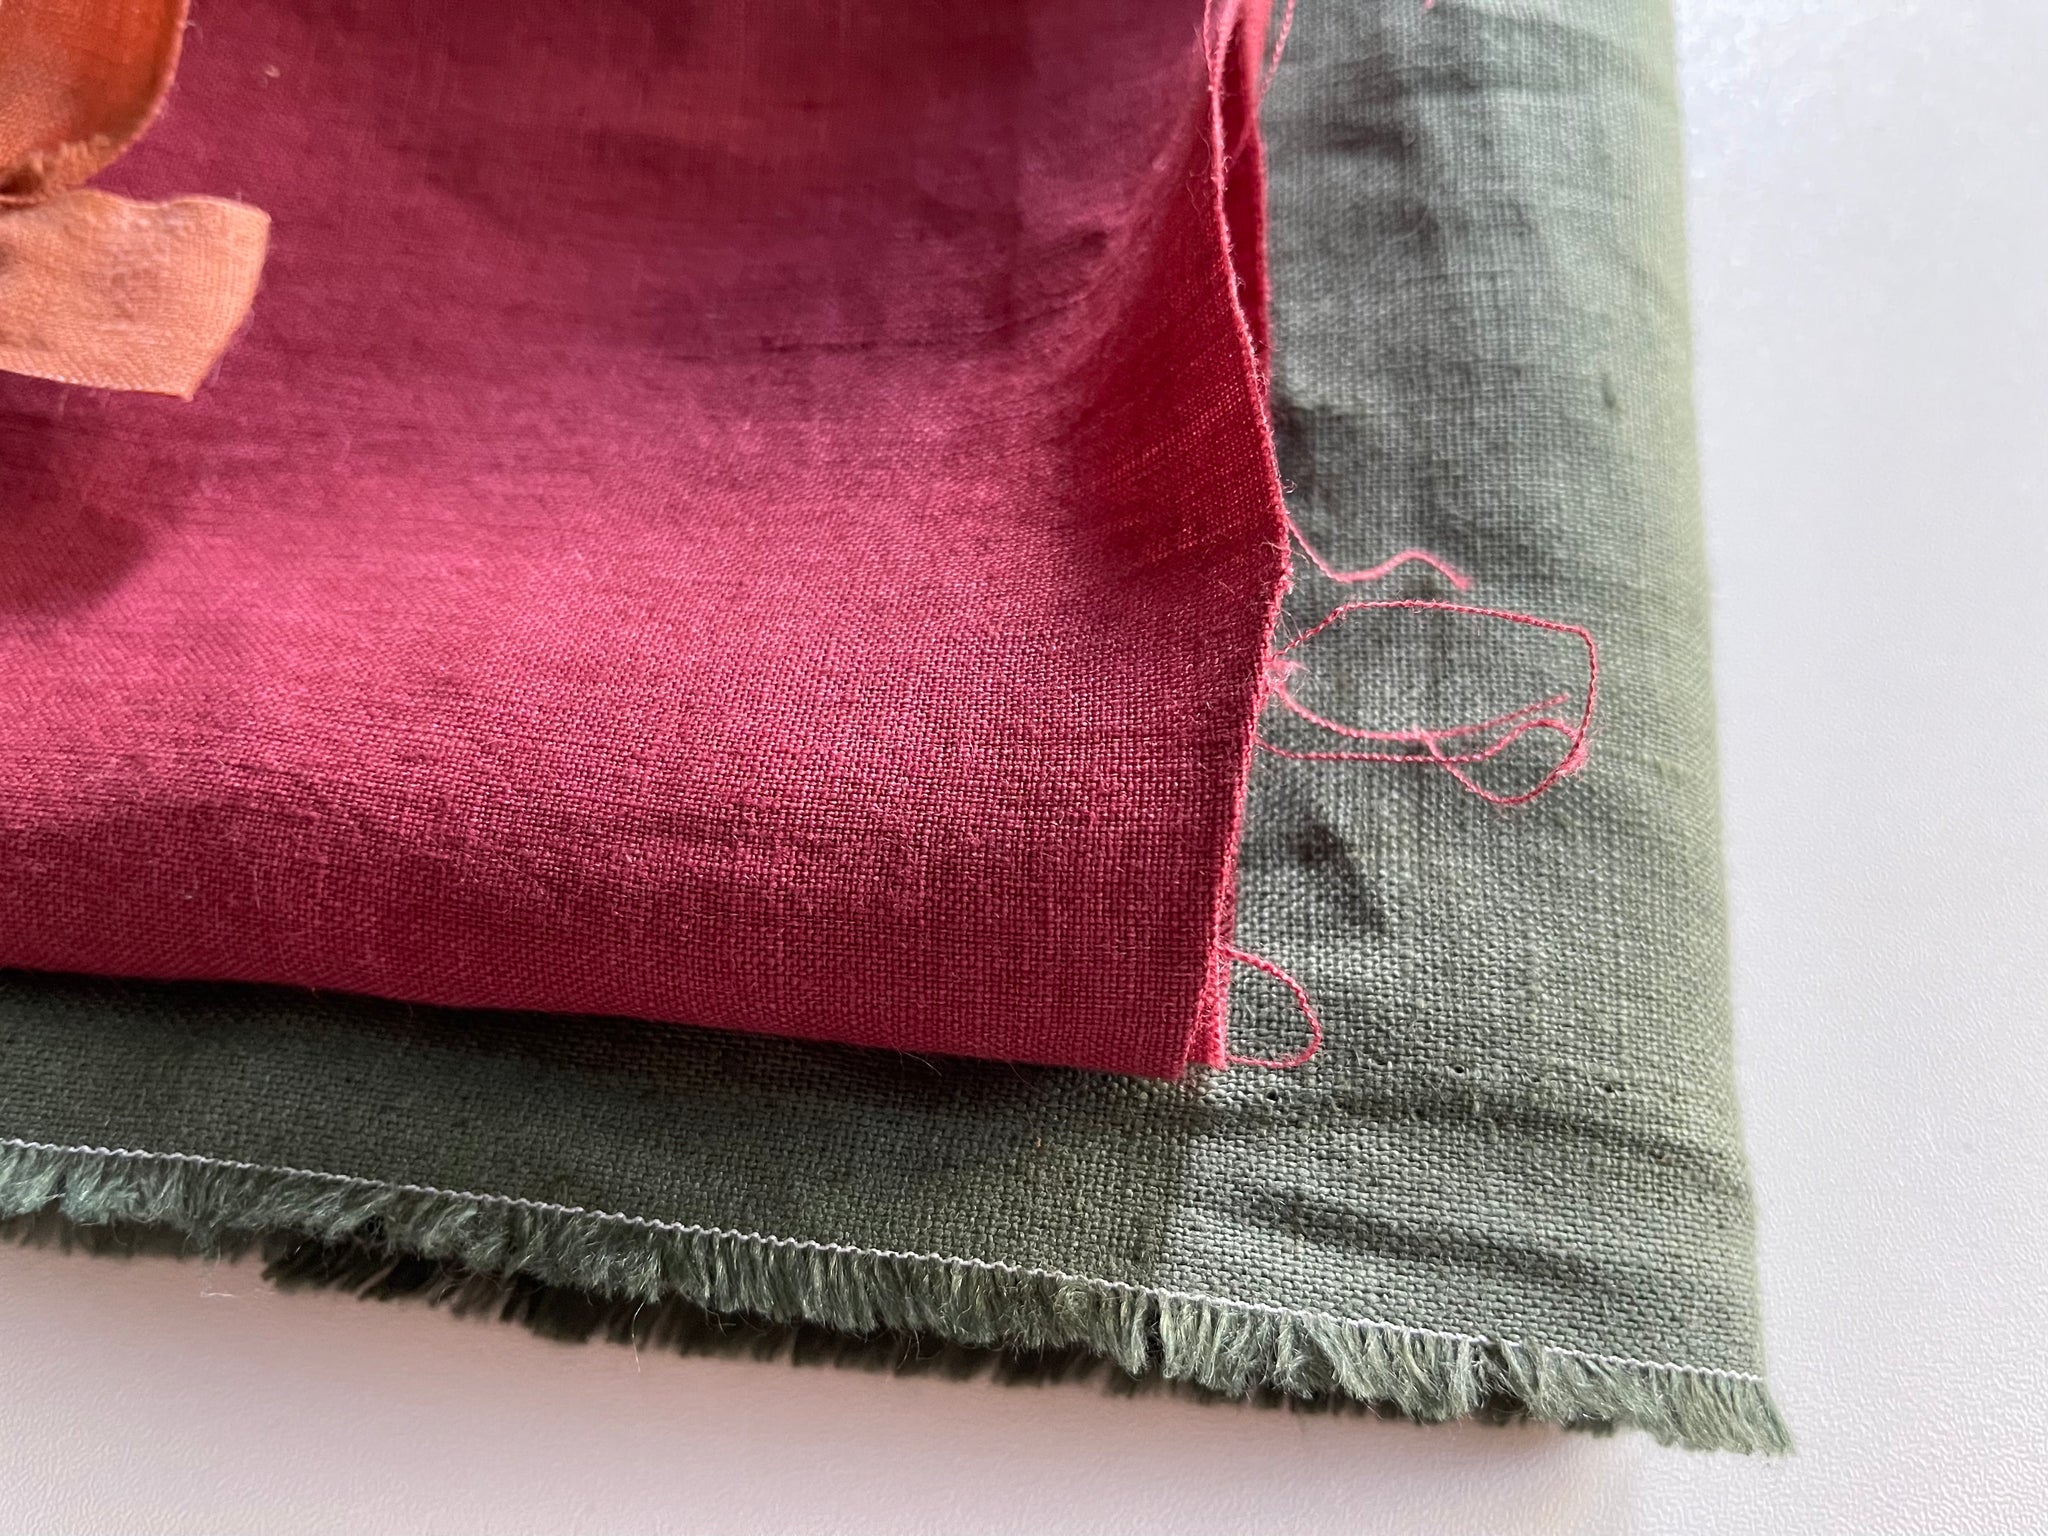 Linen Fabric Remnants - Maroon and Beetle